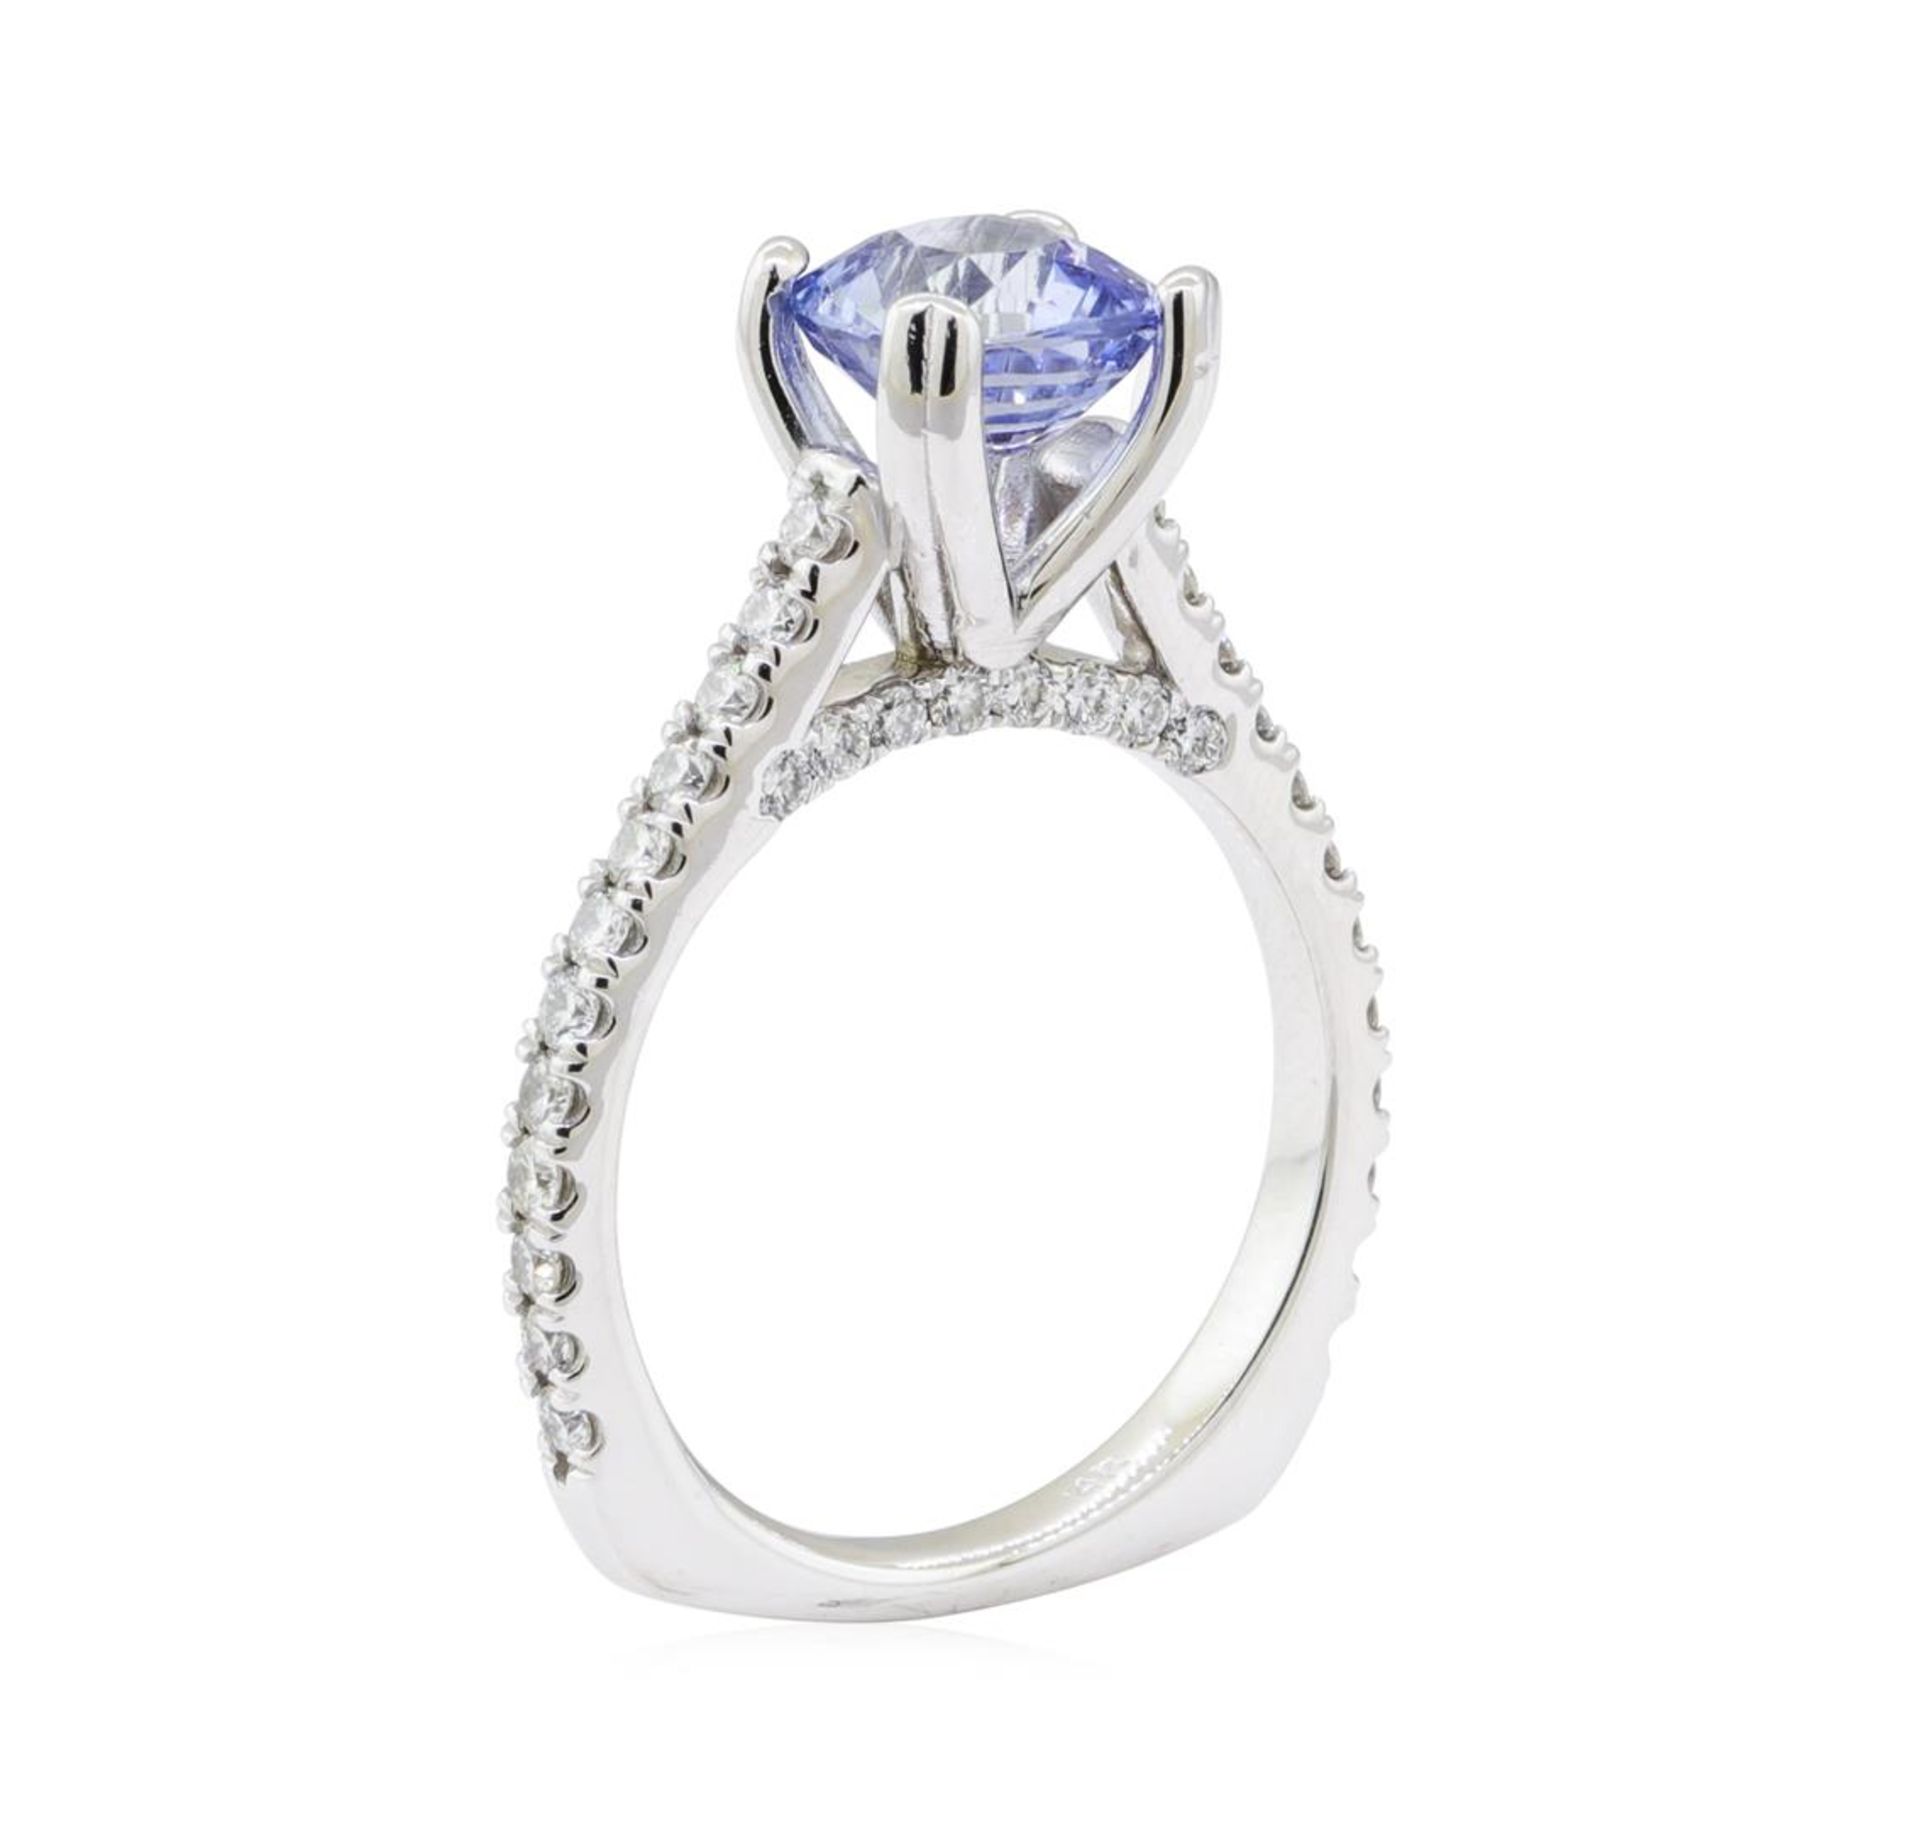 3.06 ctw Sapphire and Diamond Ring - 14KT White Gold - Image 4 of 5